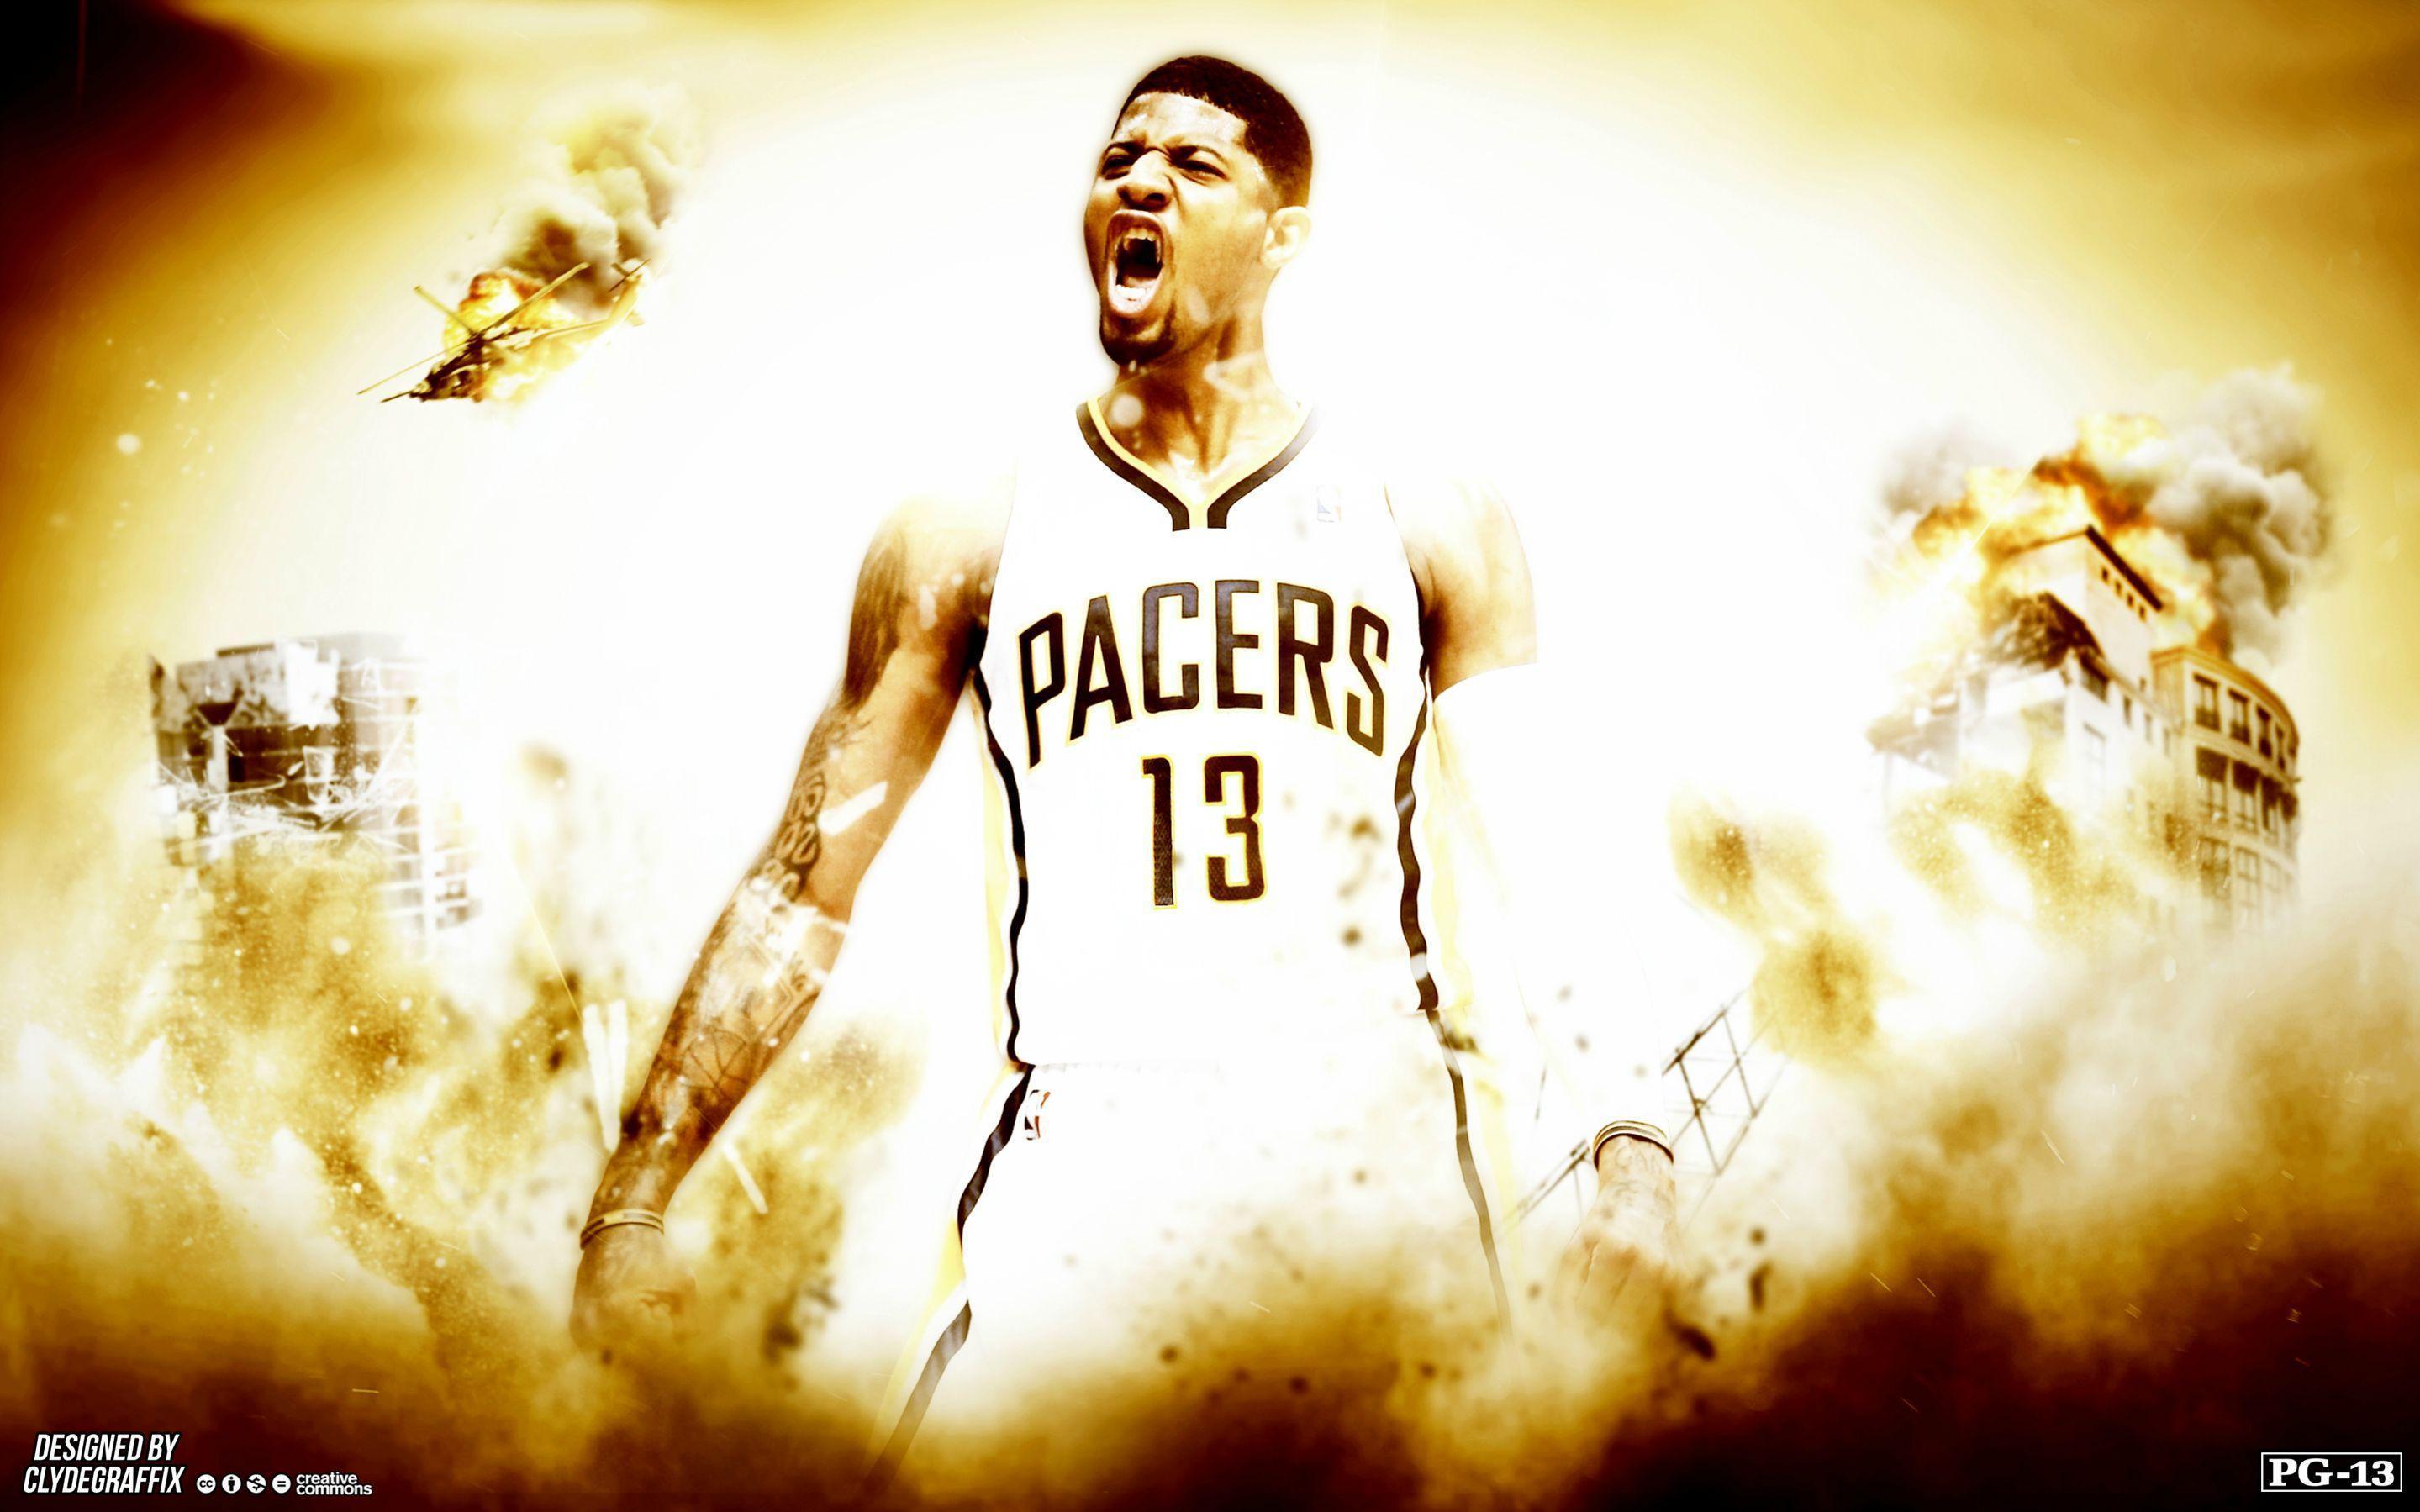 Made a Paul George wallpapers I thought you guys might like! : pacers